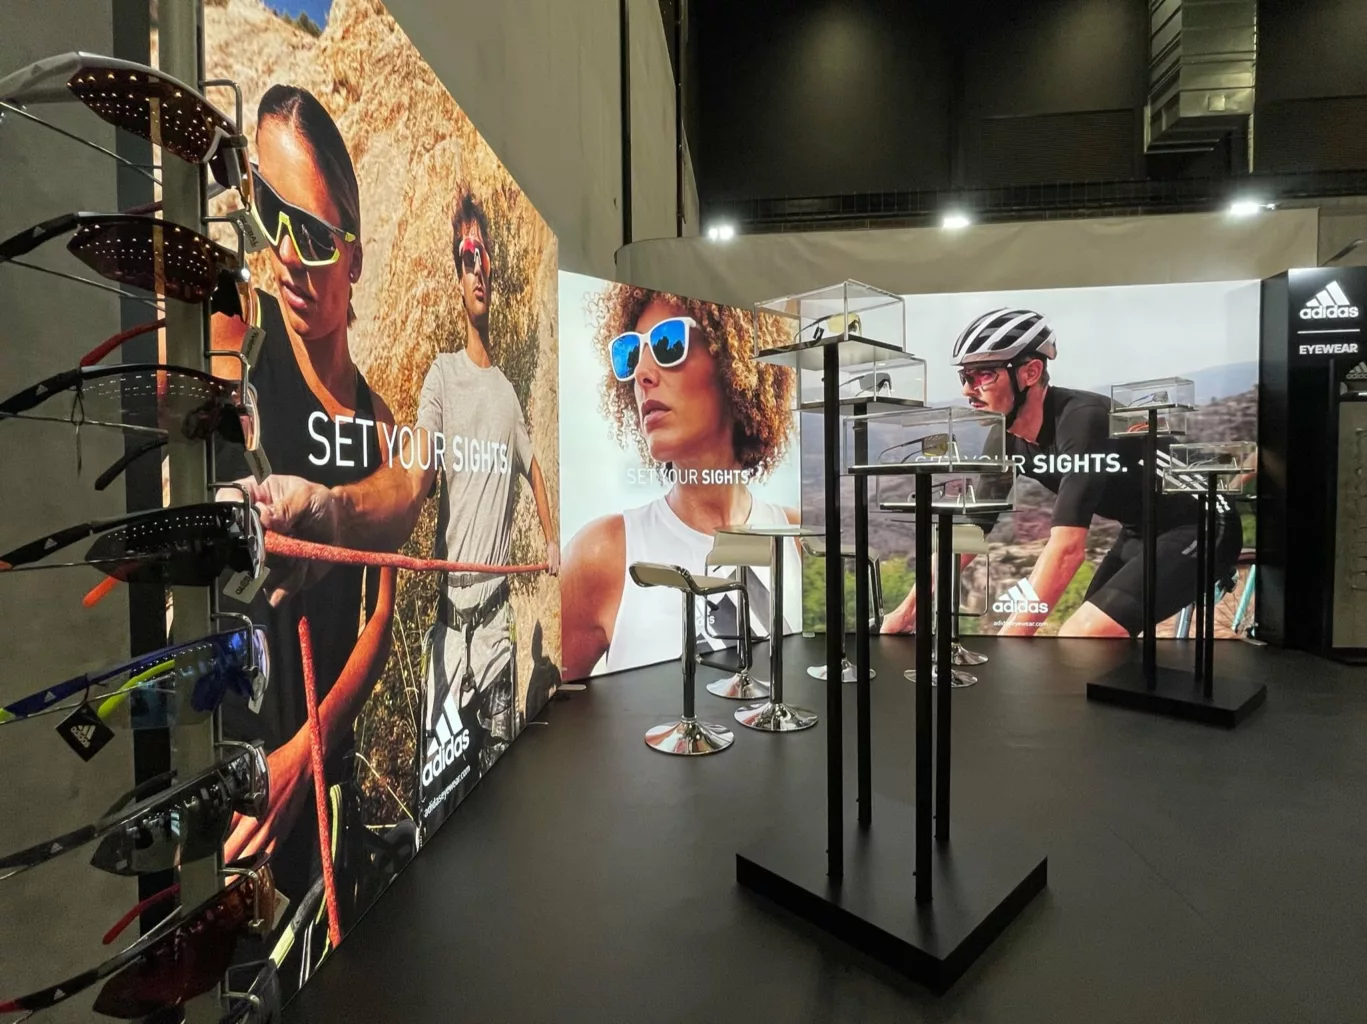 marcolin adidas sport exhibition area at 100% optical 2022